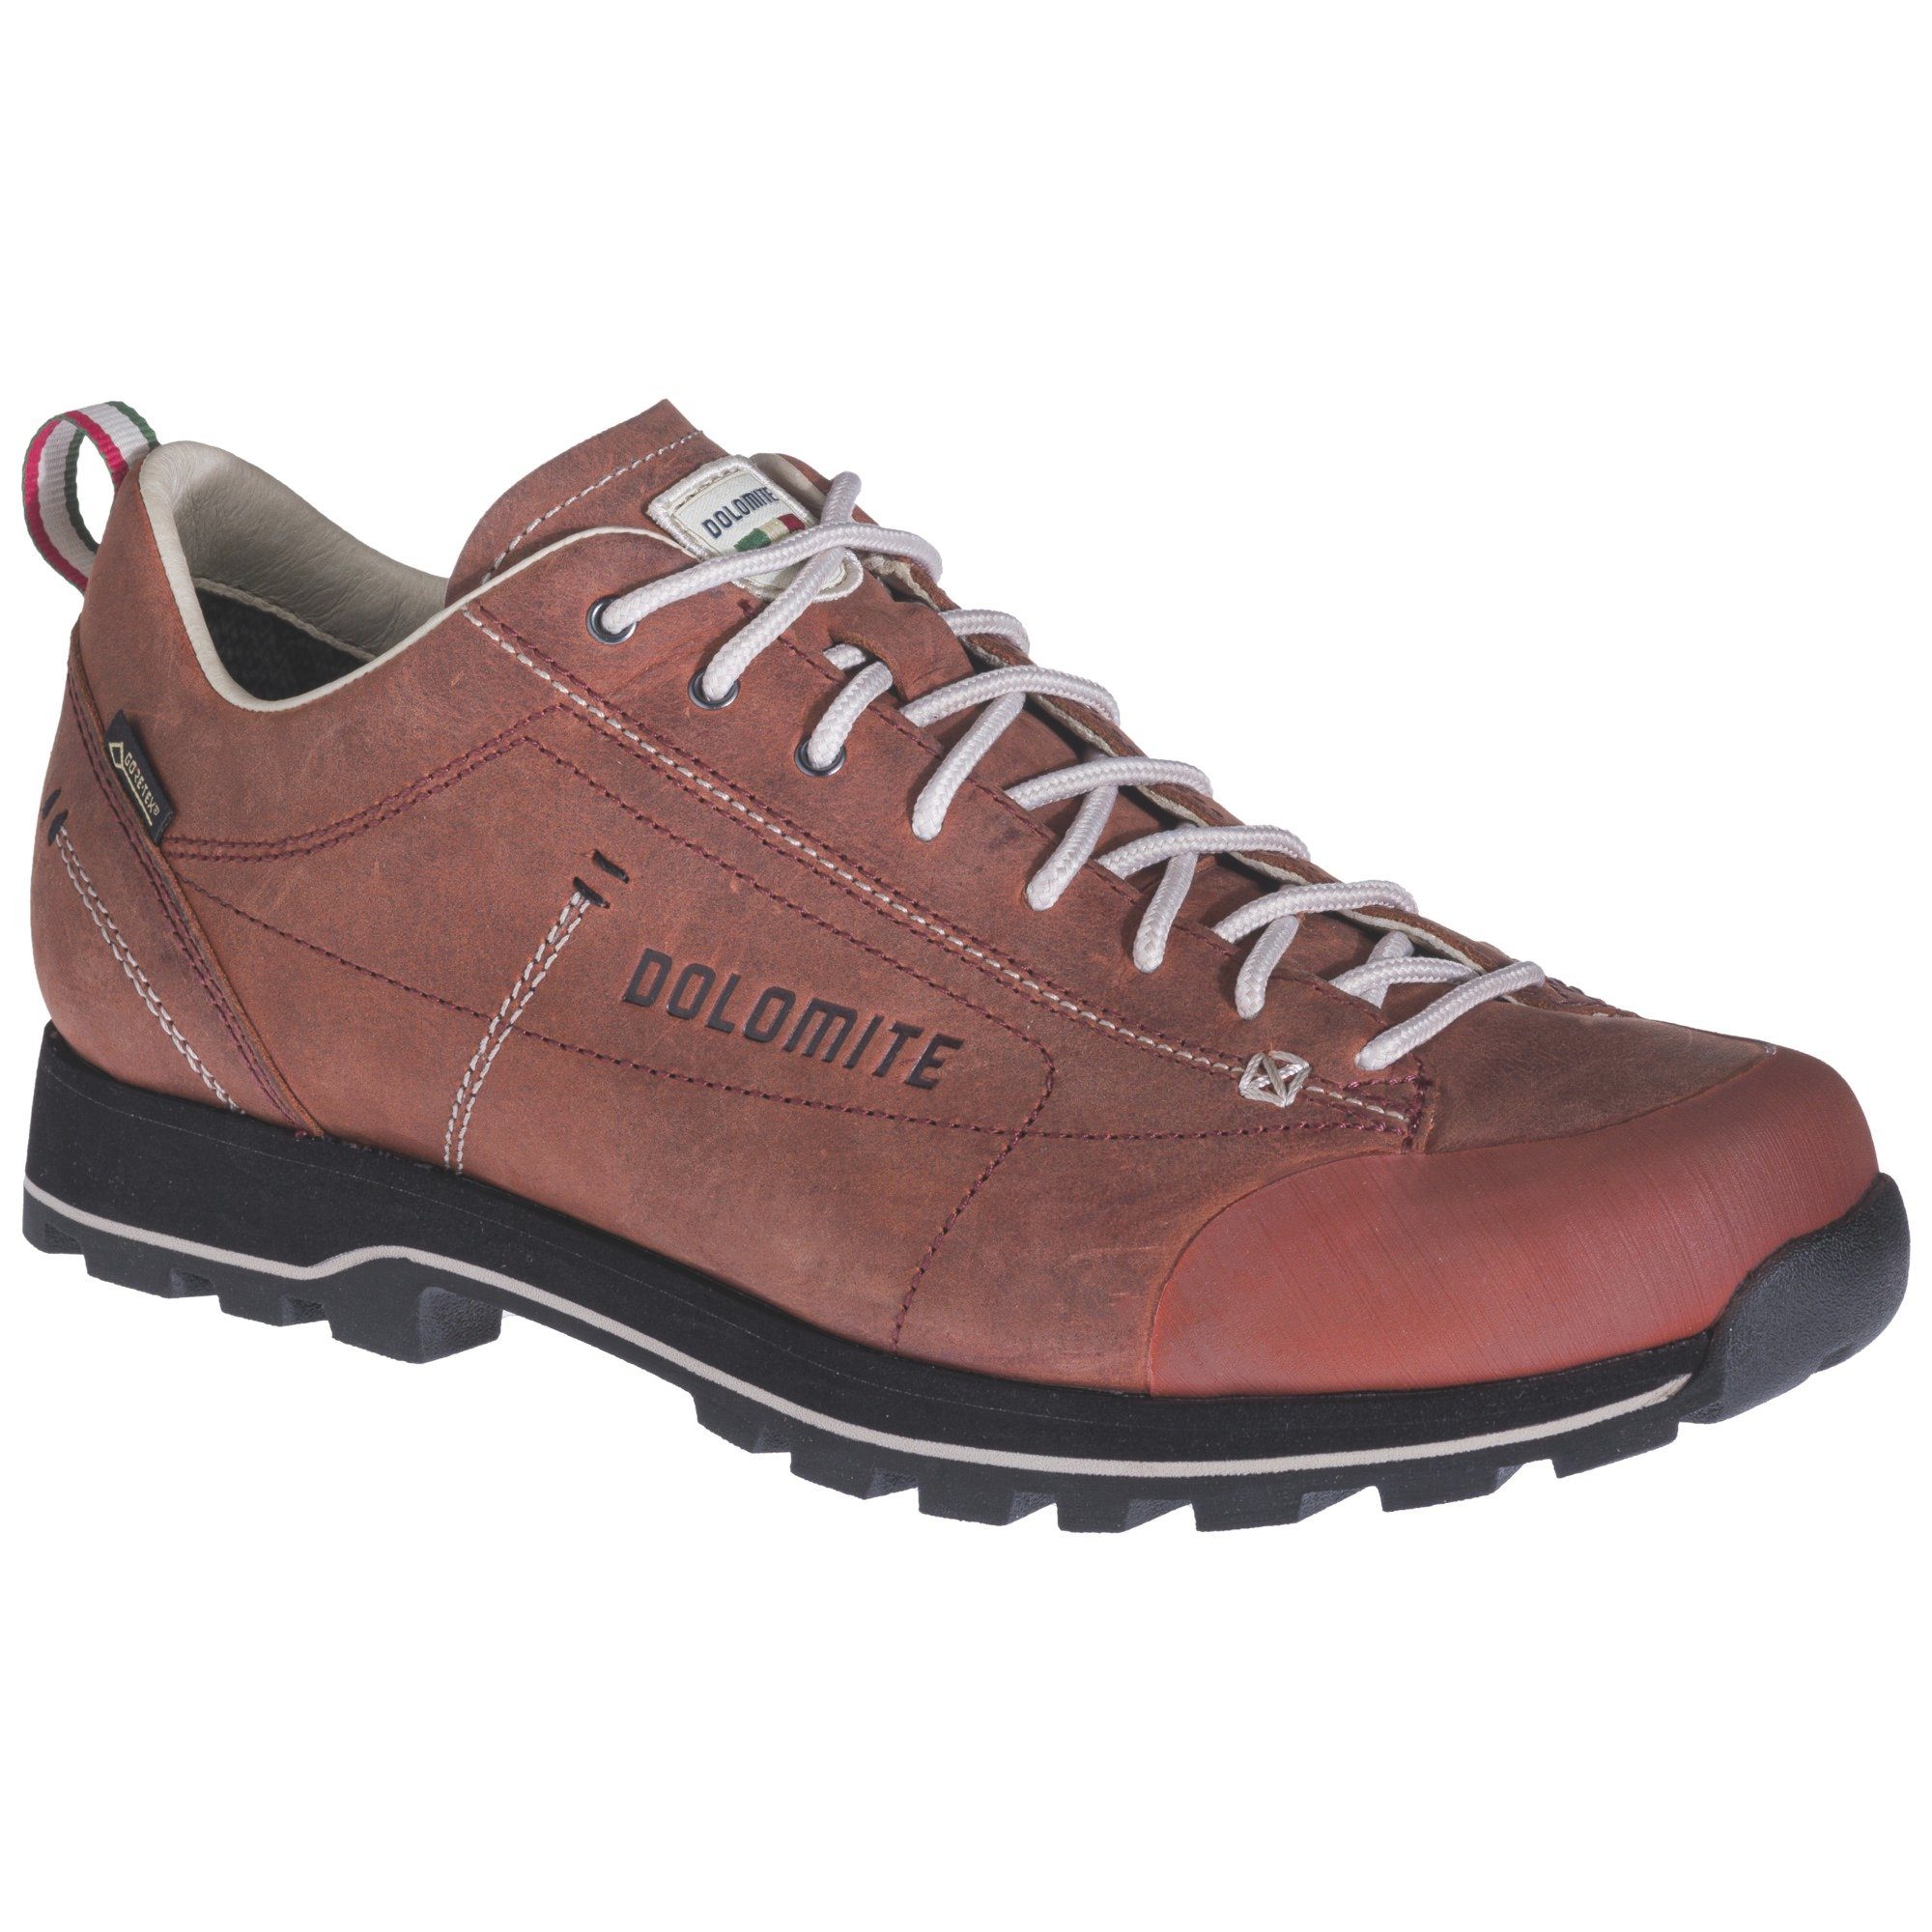 Low Red Gt Ginger Fg Dolomite DOL Dolomite Outdoorschuh Shoe Cinquantaquattro